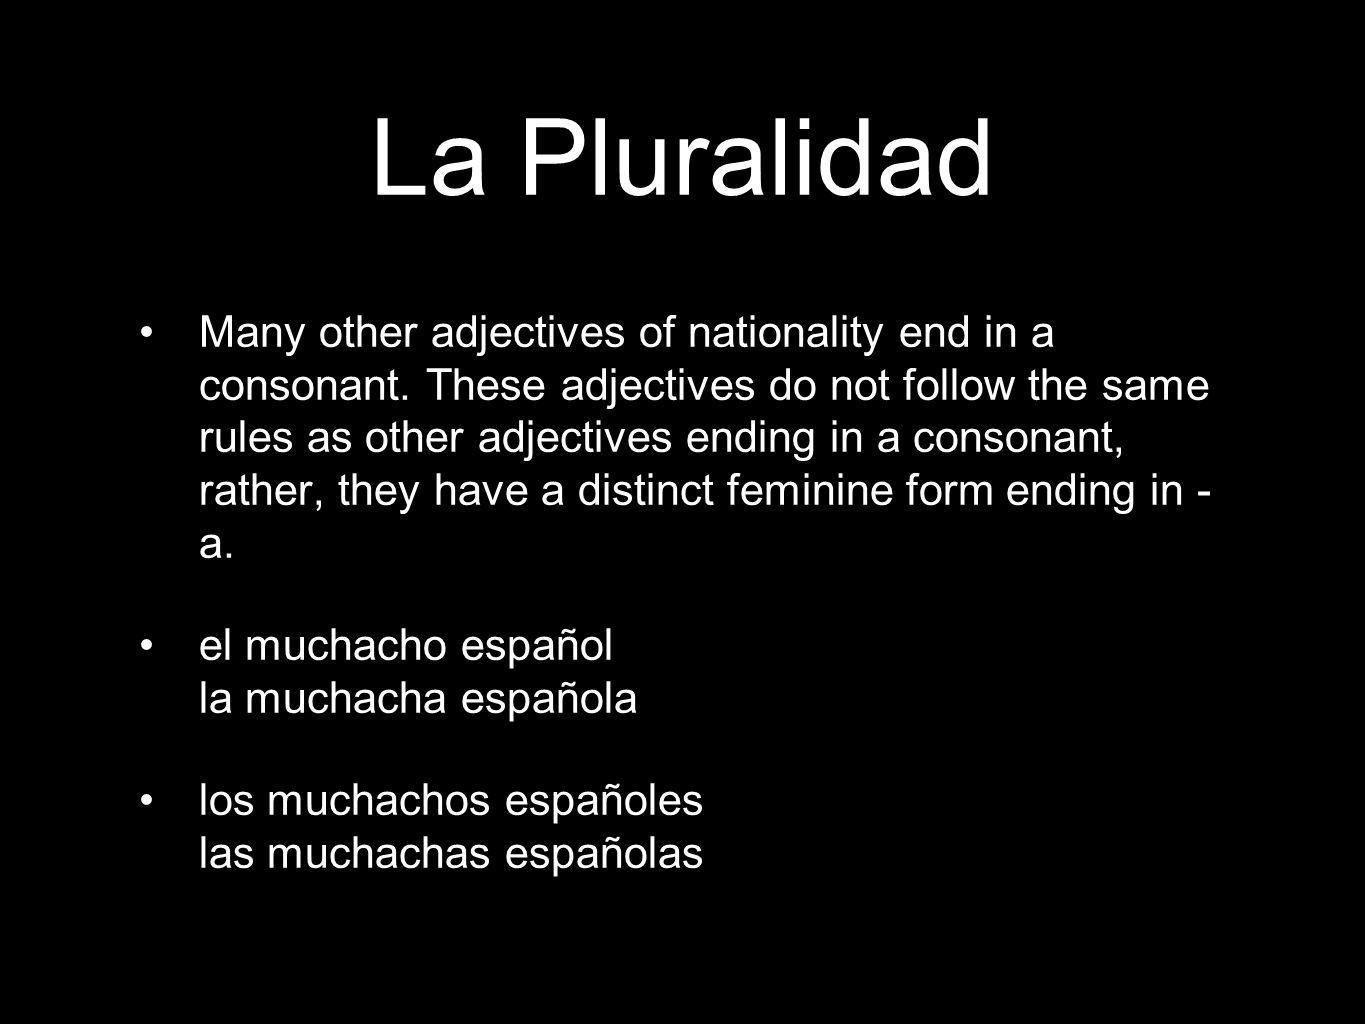 La Pluralidad Many other adjectives of nationality end in a consonant.